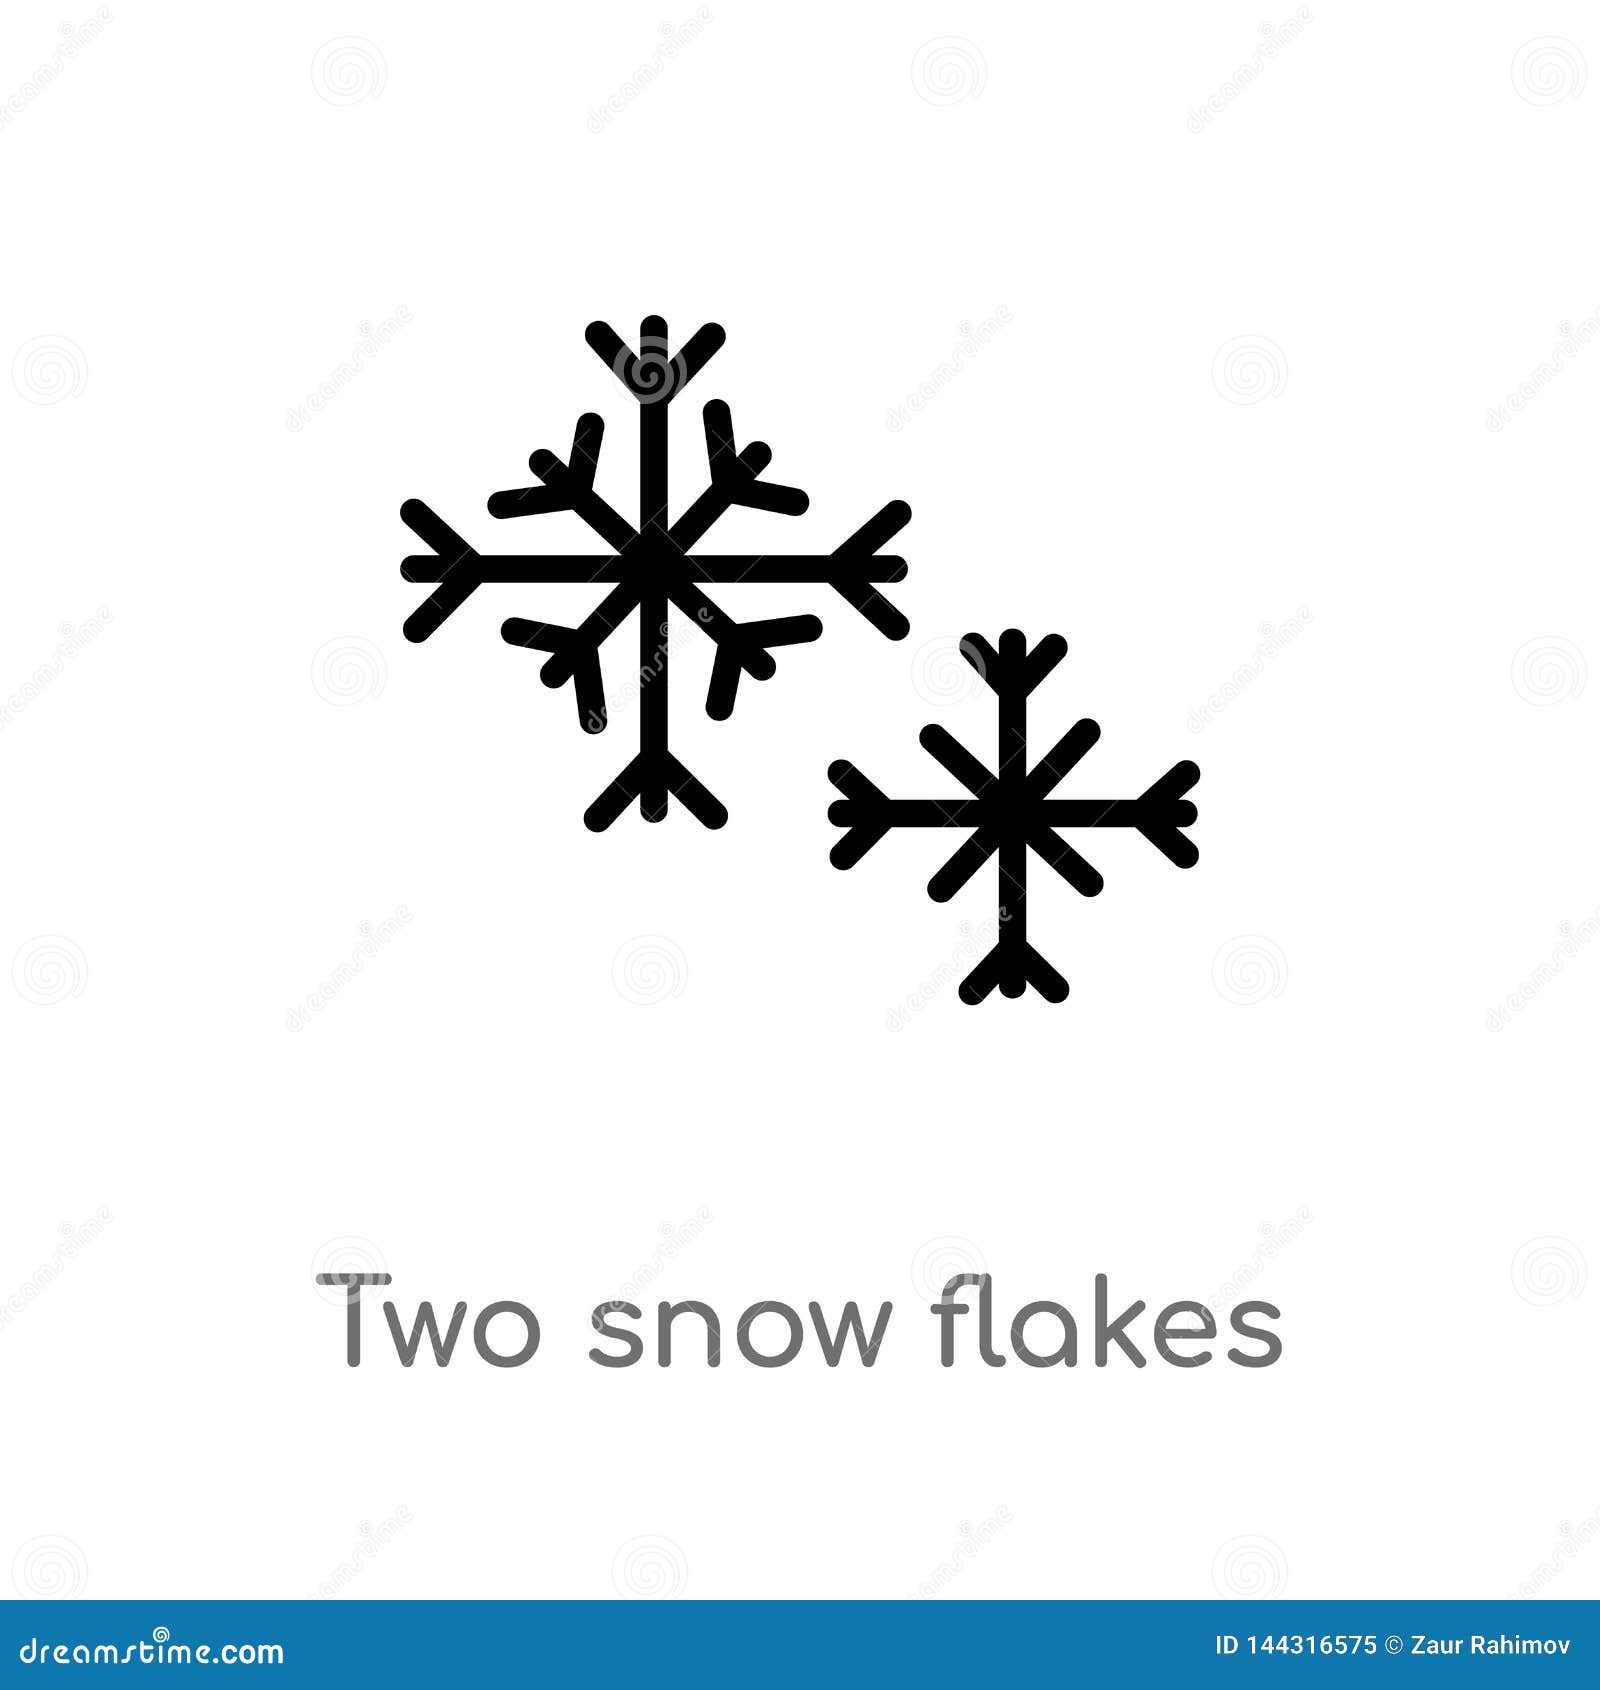 White Snow Flakes Hanging on Strings Stock Vector - Illustration